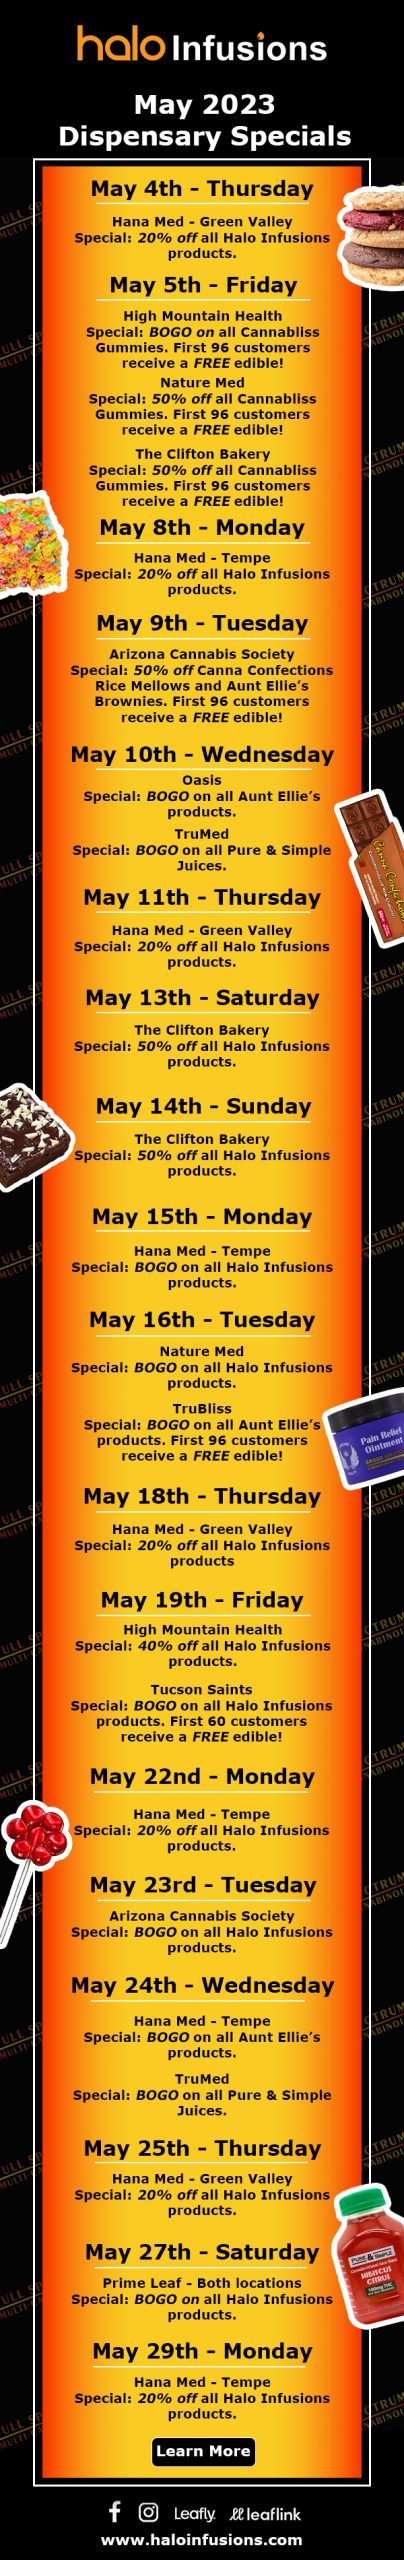 Halo Infusions May 2023 Dispensary Specials